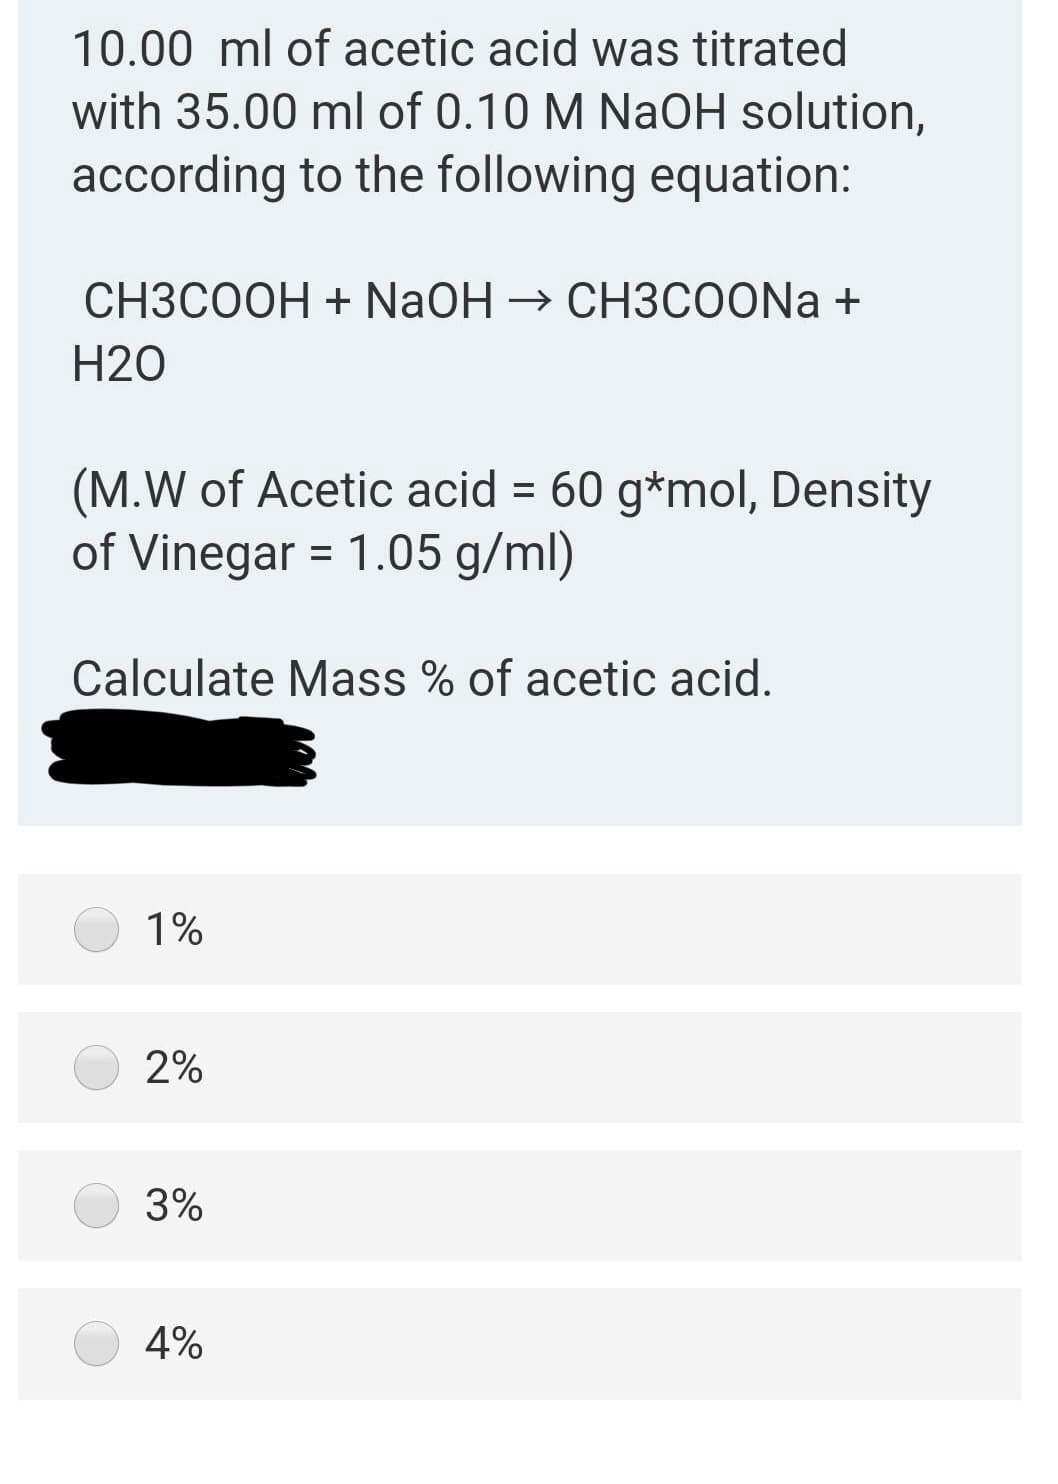 10.00 ml of acetic acid was titrated
with 35.00 ml of 0.10 M NaOH solution,
according to the following equation:
СНЗСООН + NaOH > CHЗСОONa +
H20
(M.W of Acetic acid = 60 g*mol, Density
of Vinegar = 1.05 g/ml)
Calculate Mass % of acetic acid.
1%
2%
3%
4%
